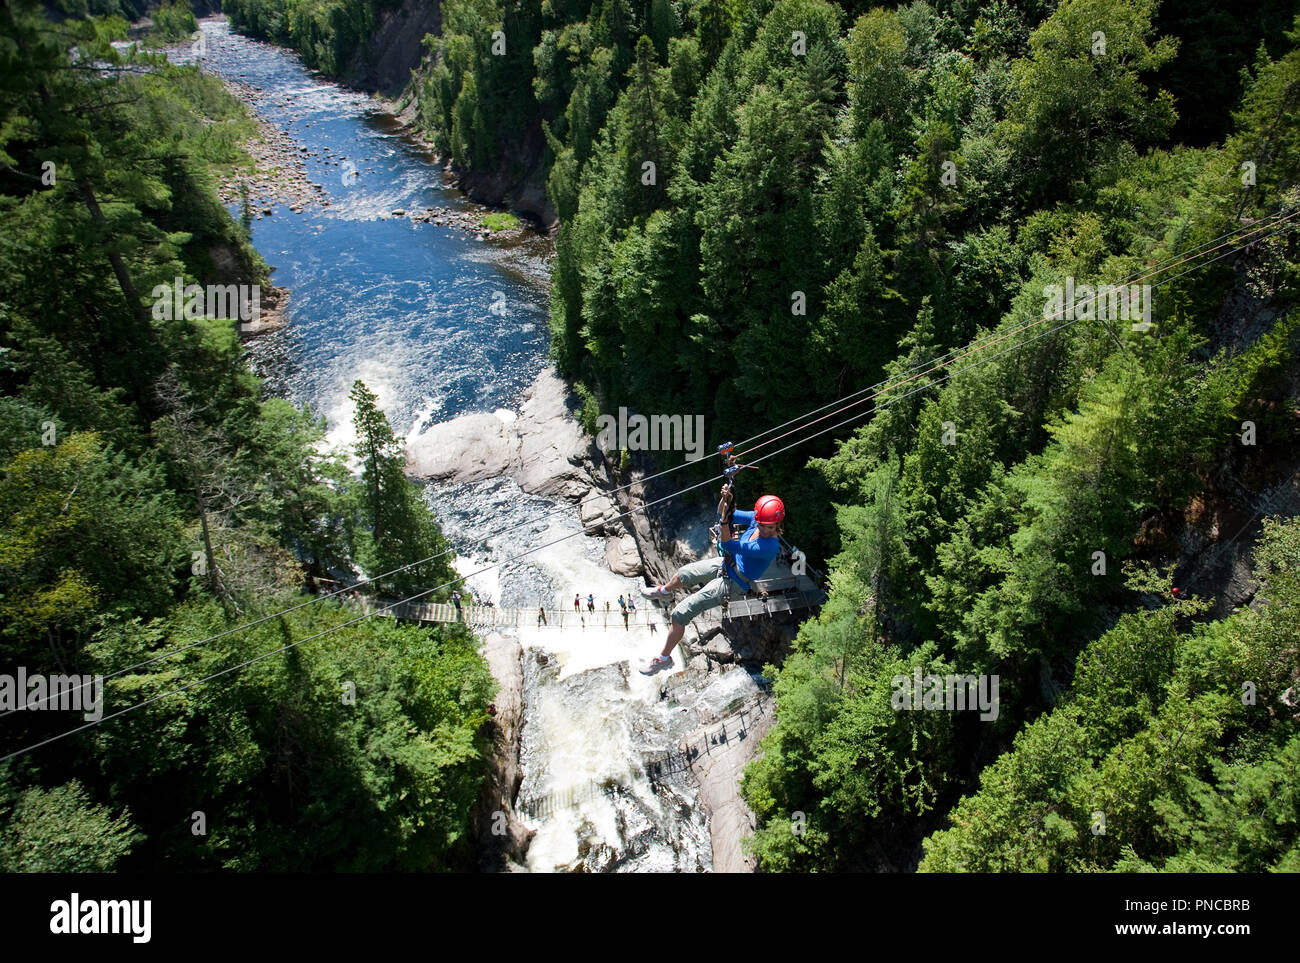 North America, Canada, Quebec, Beaupre, Canyon Ste-Anne, woman on zip line Stock Photo